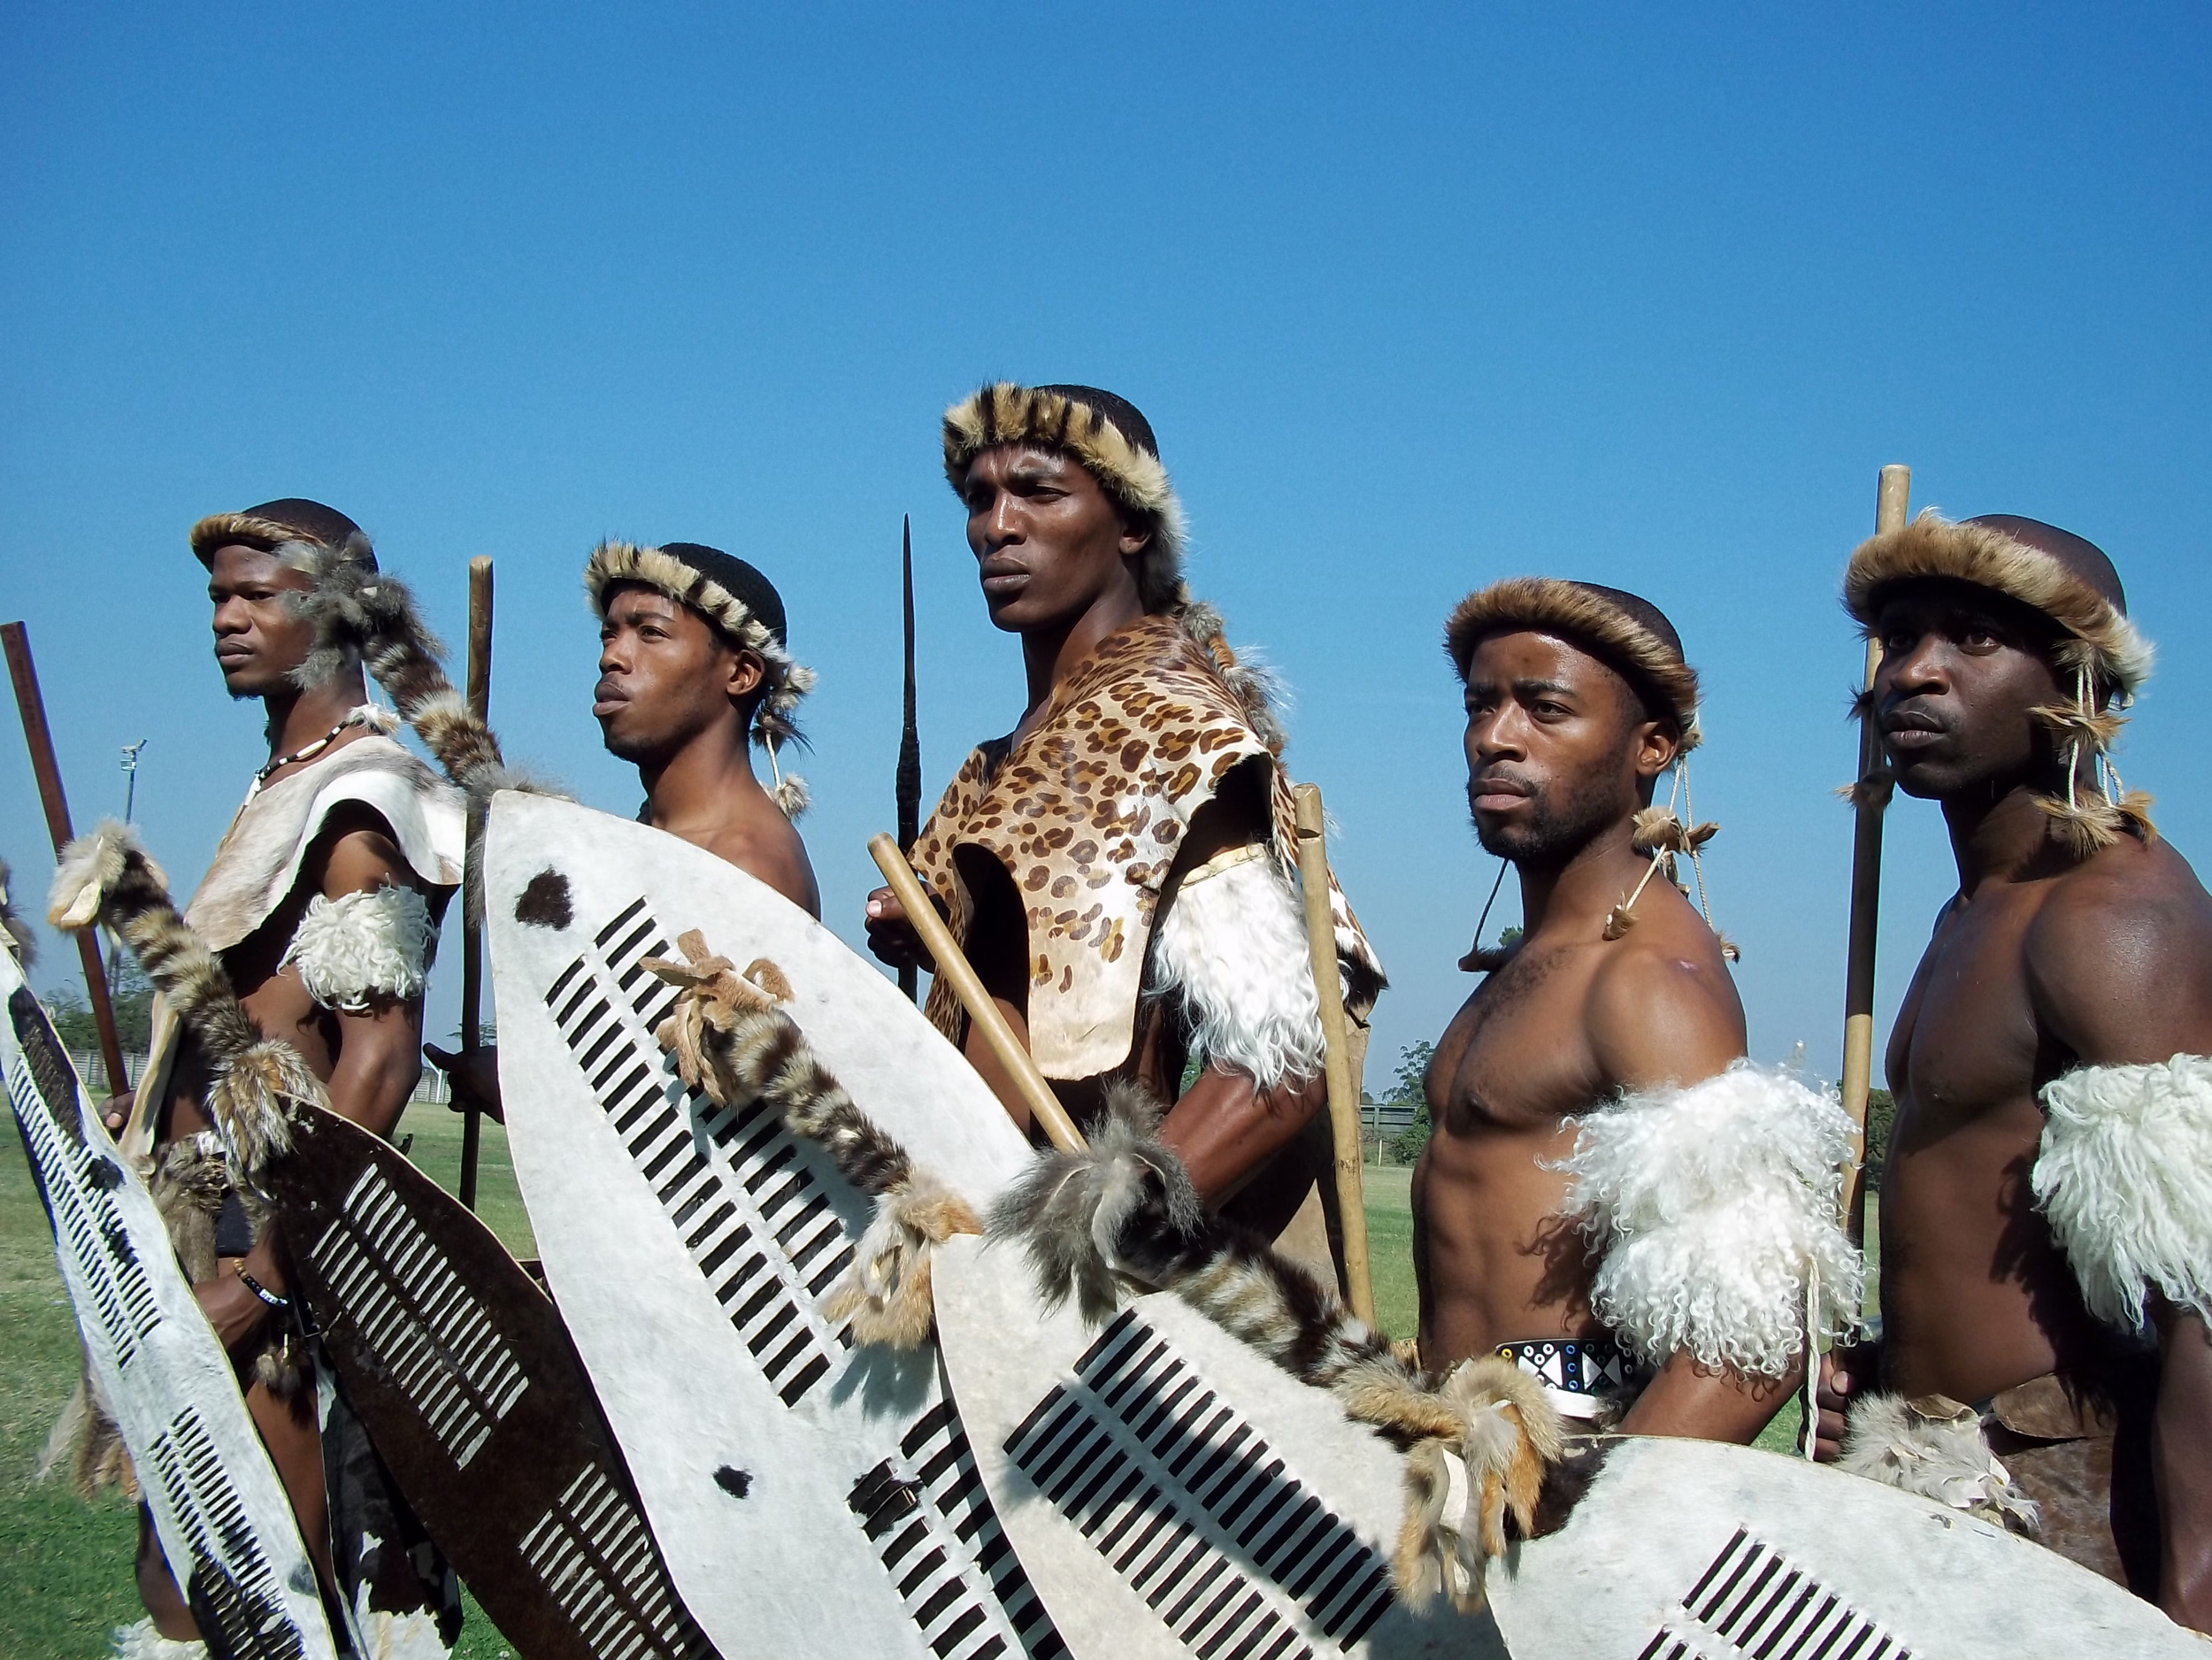 The Zulu are an ethnic group of Southern Africa and the largest ethnic grou...